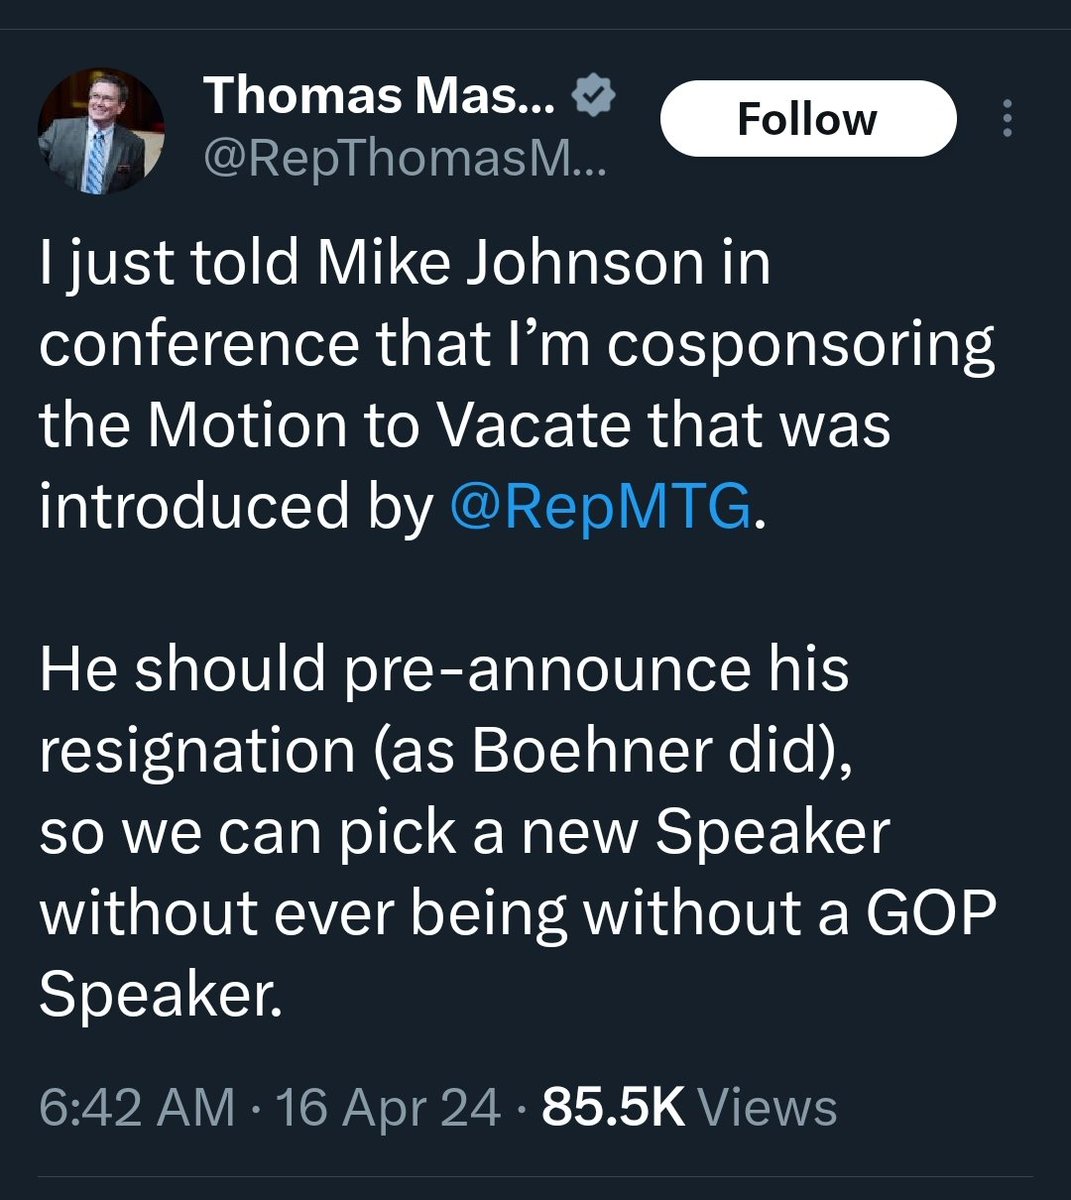 These @HouseGOP clowns 🤡 can't govern. Rep Gallagher resigns on April 19, and they can only afford to lose one GOP so Preacher Johnson definitely would need Dems lifeline to save his job. Mess.